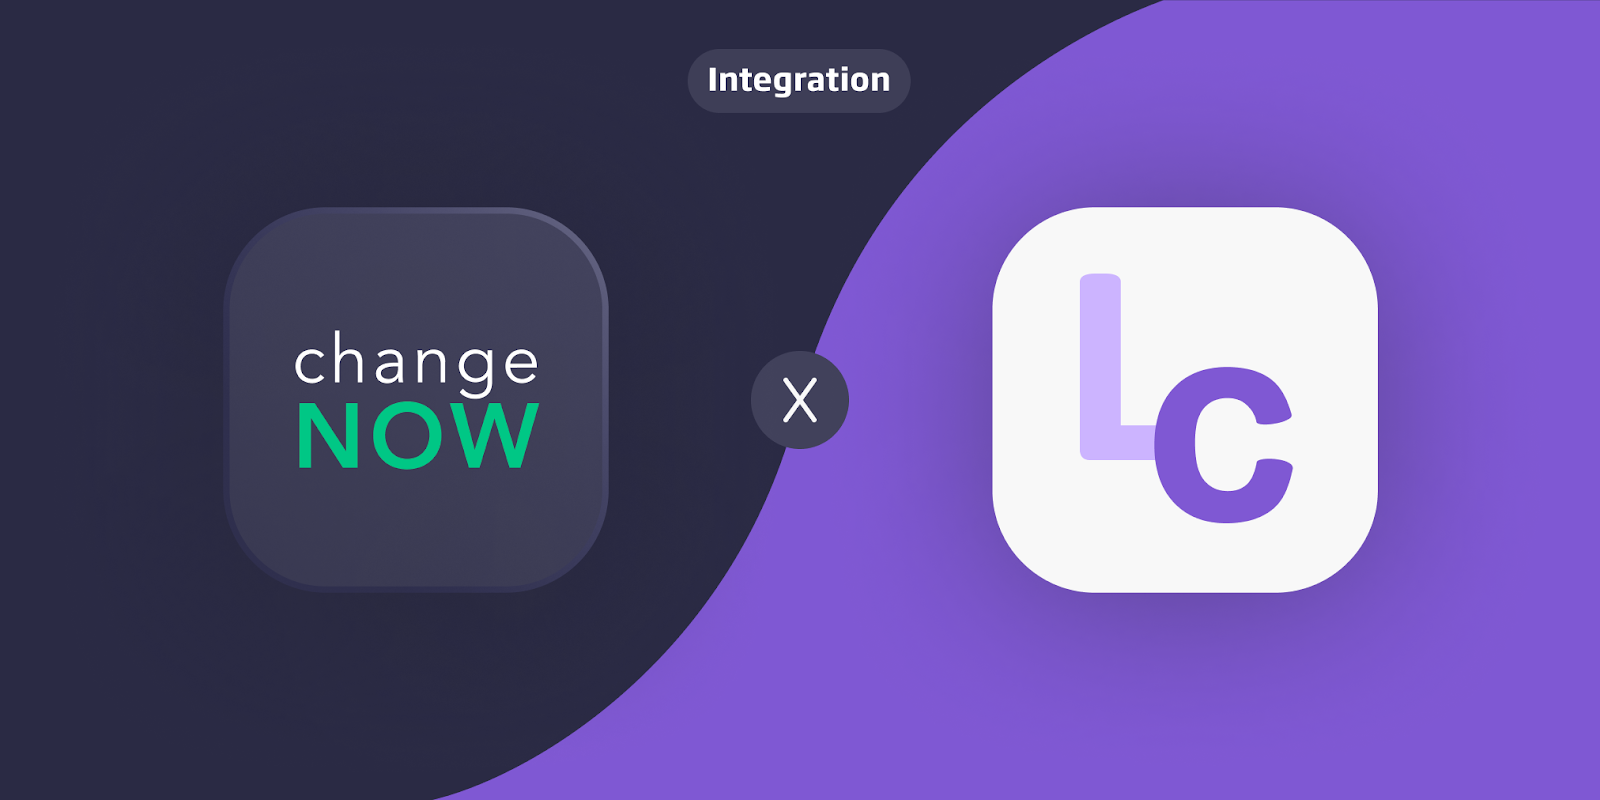 ChangeNOW is happy to announce the integration with Local Crypto